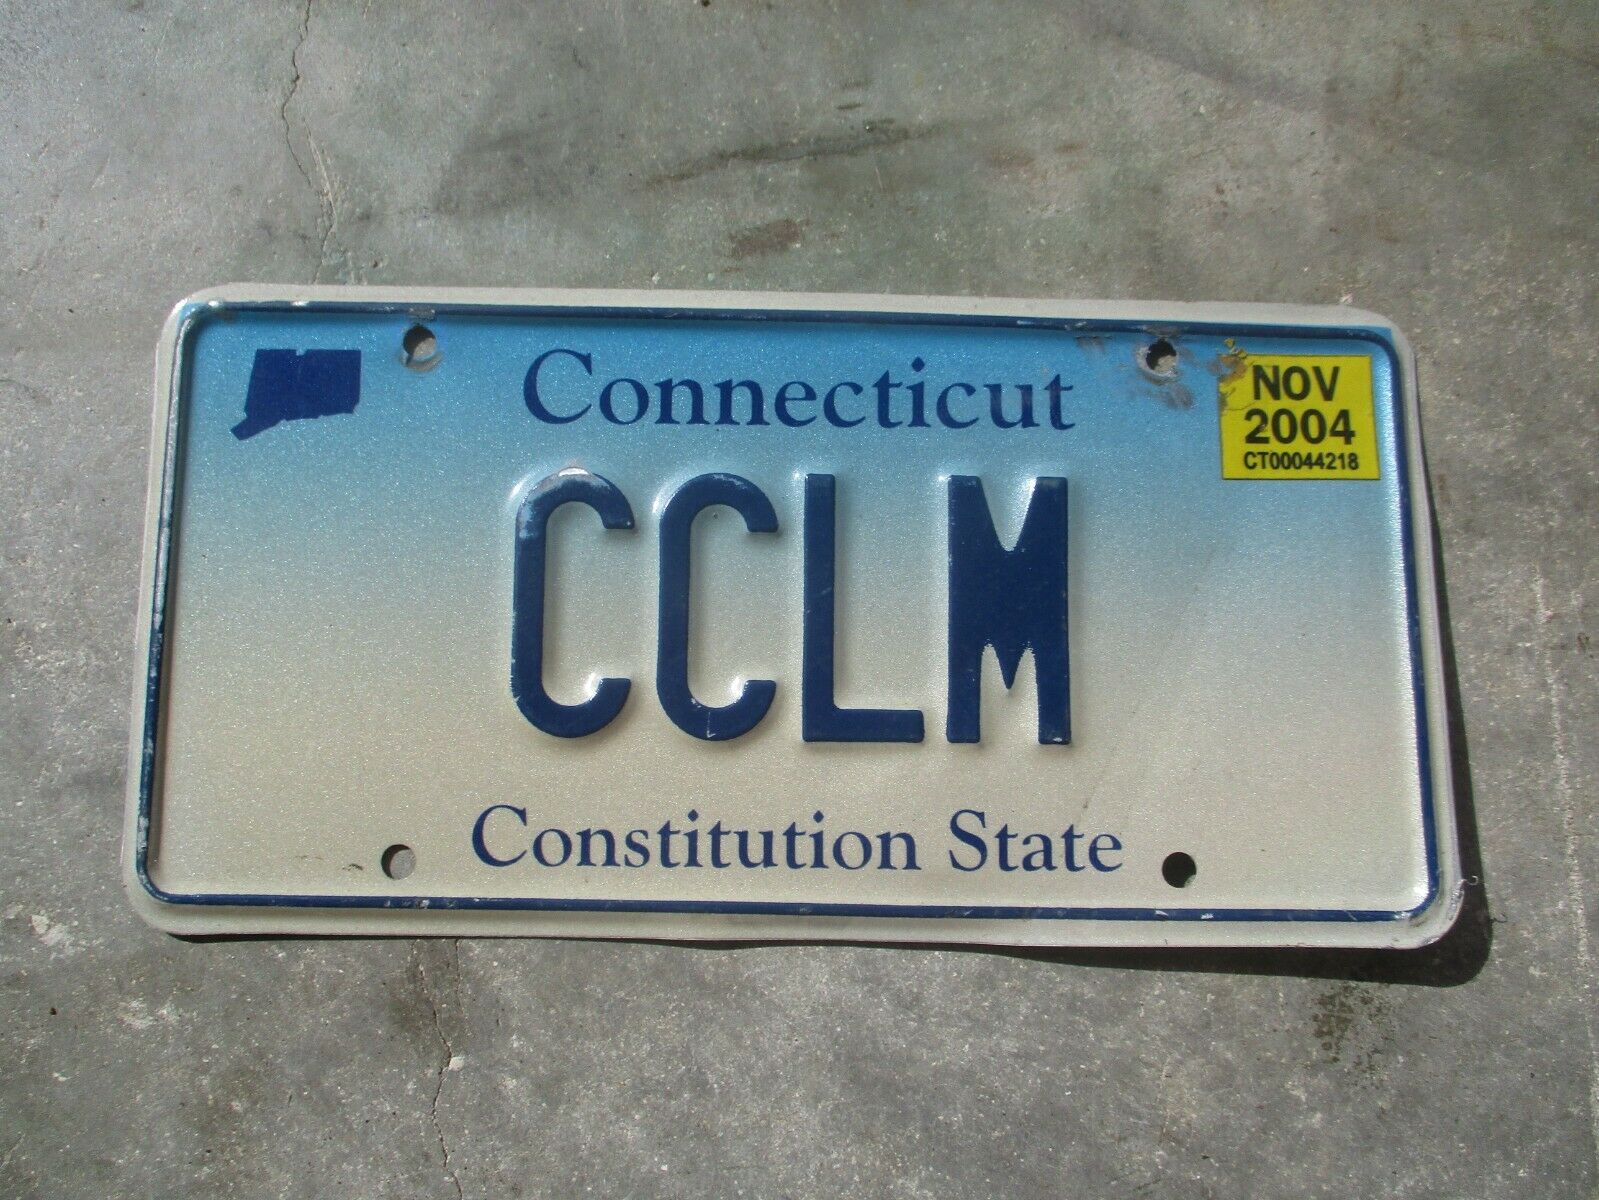 Connecticut 2004 Vanity License Plate  #    Cclm